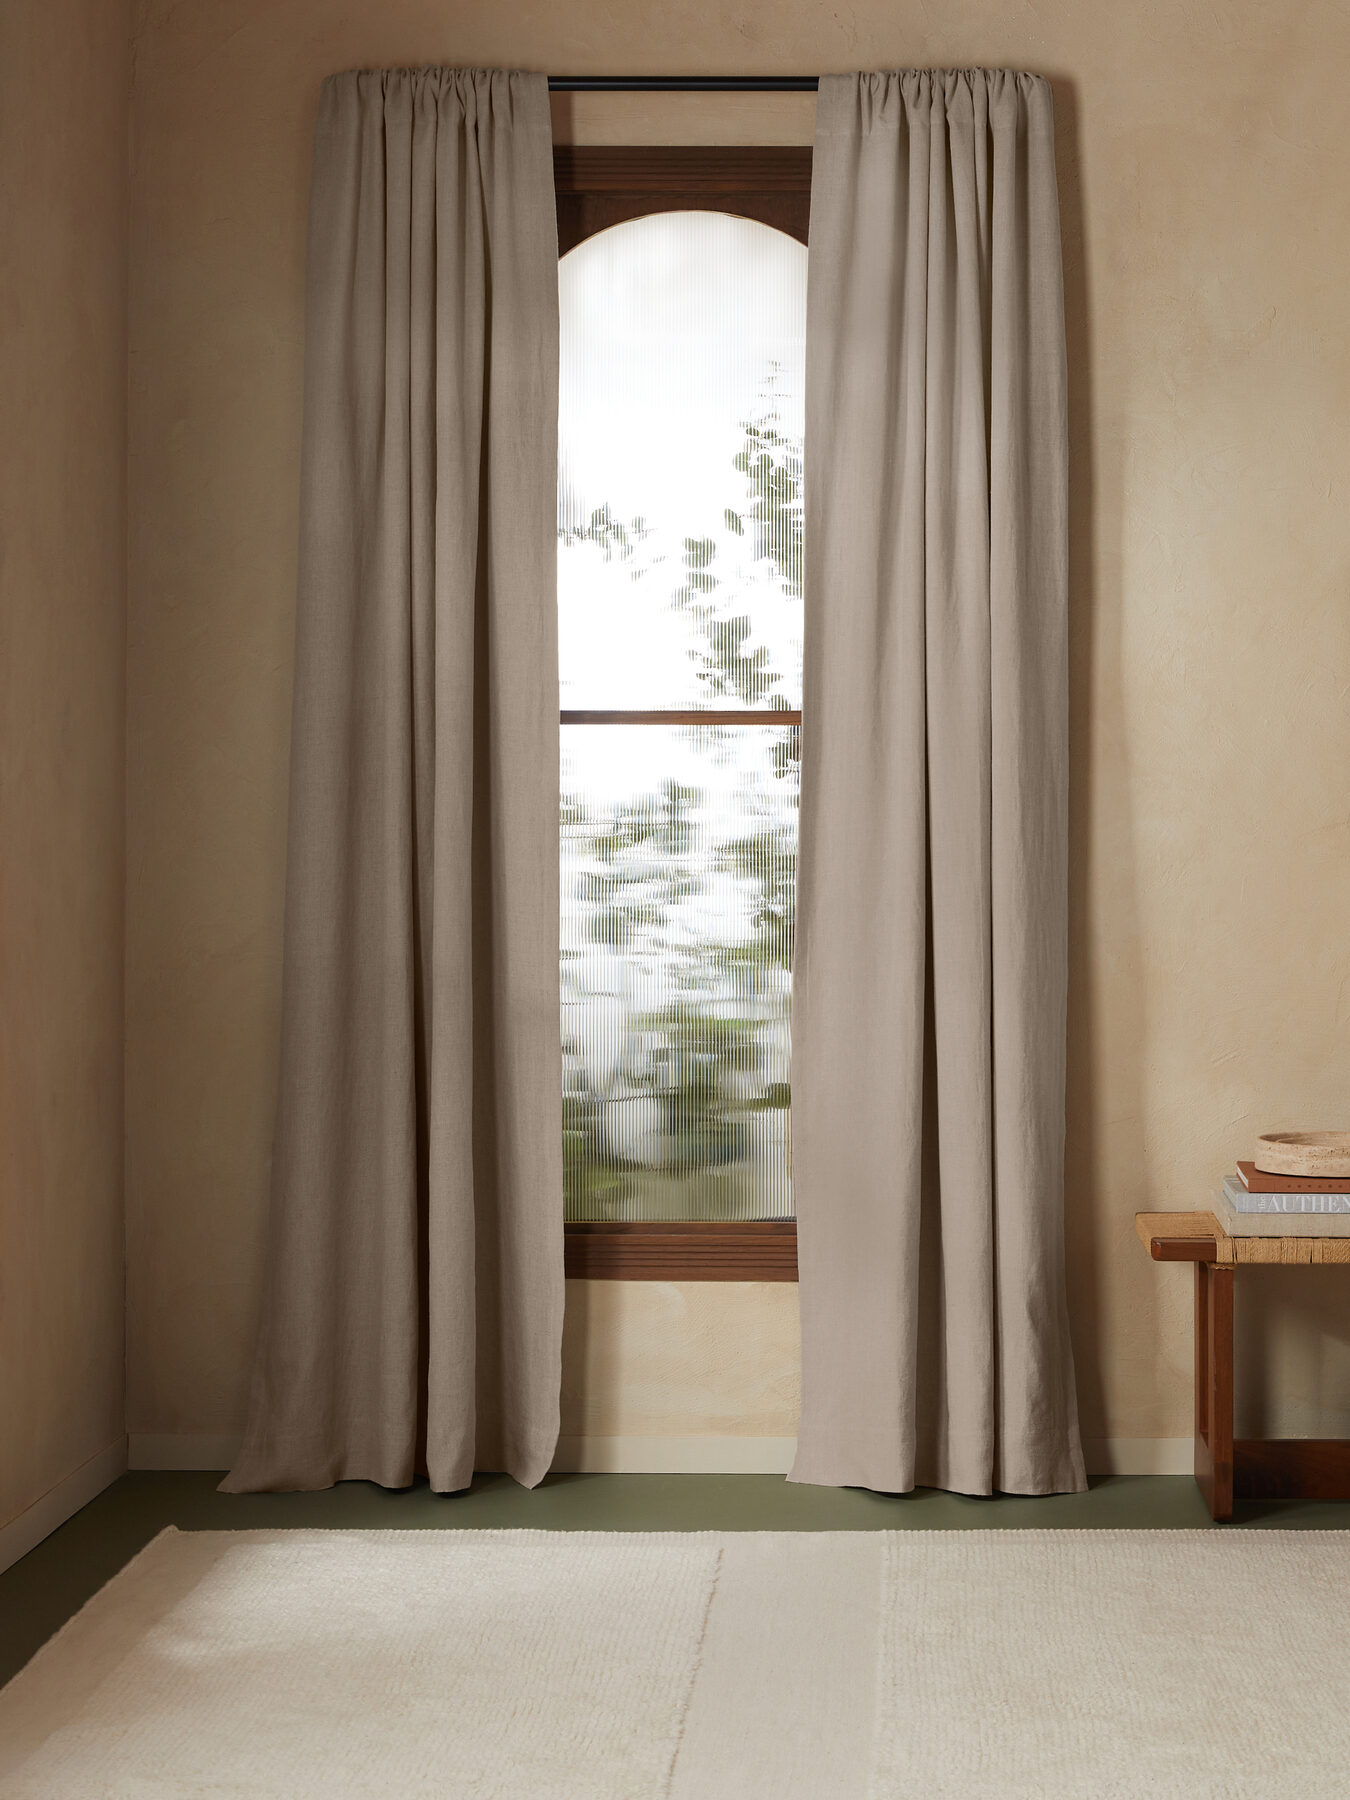 A serene room with beige walls, featuring two curtained windows, a framed landscape painting, and a wooden bench with folded towels.